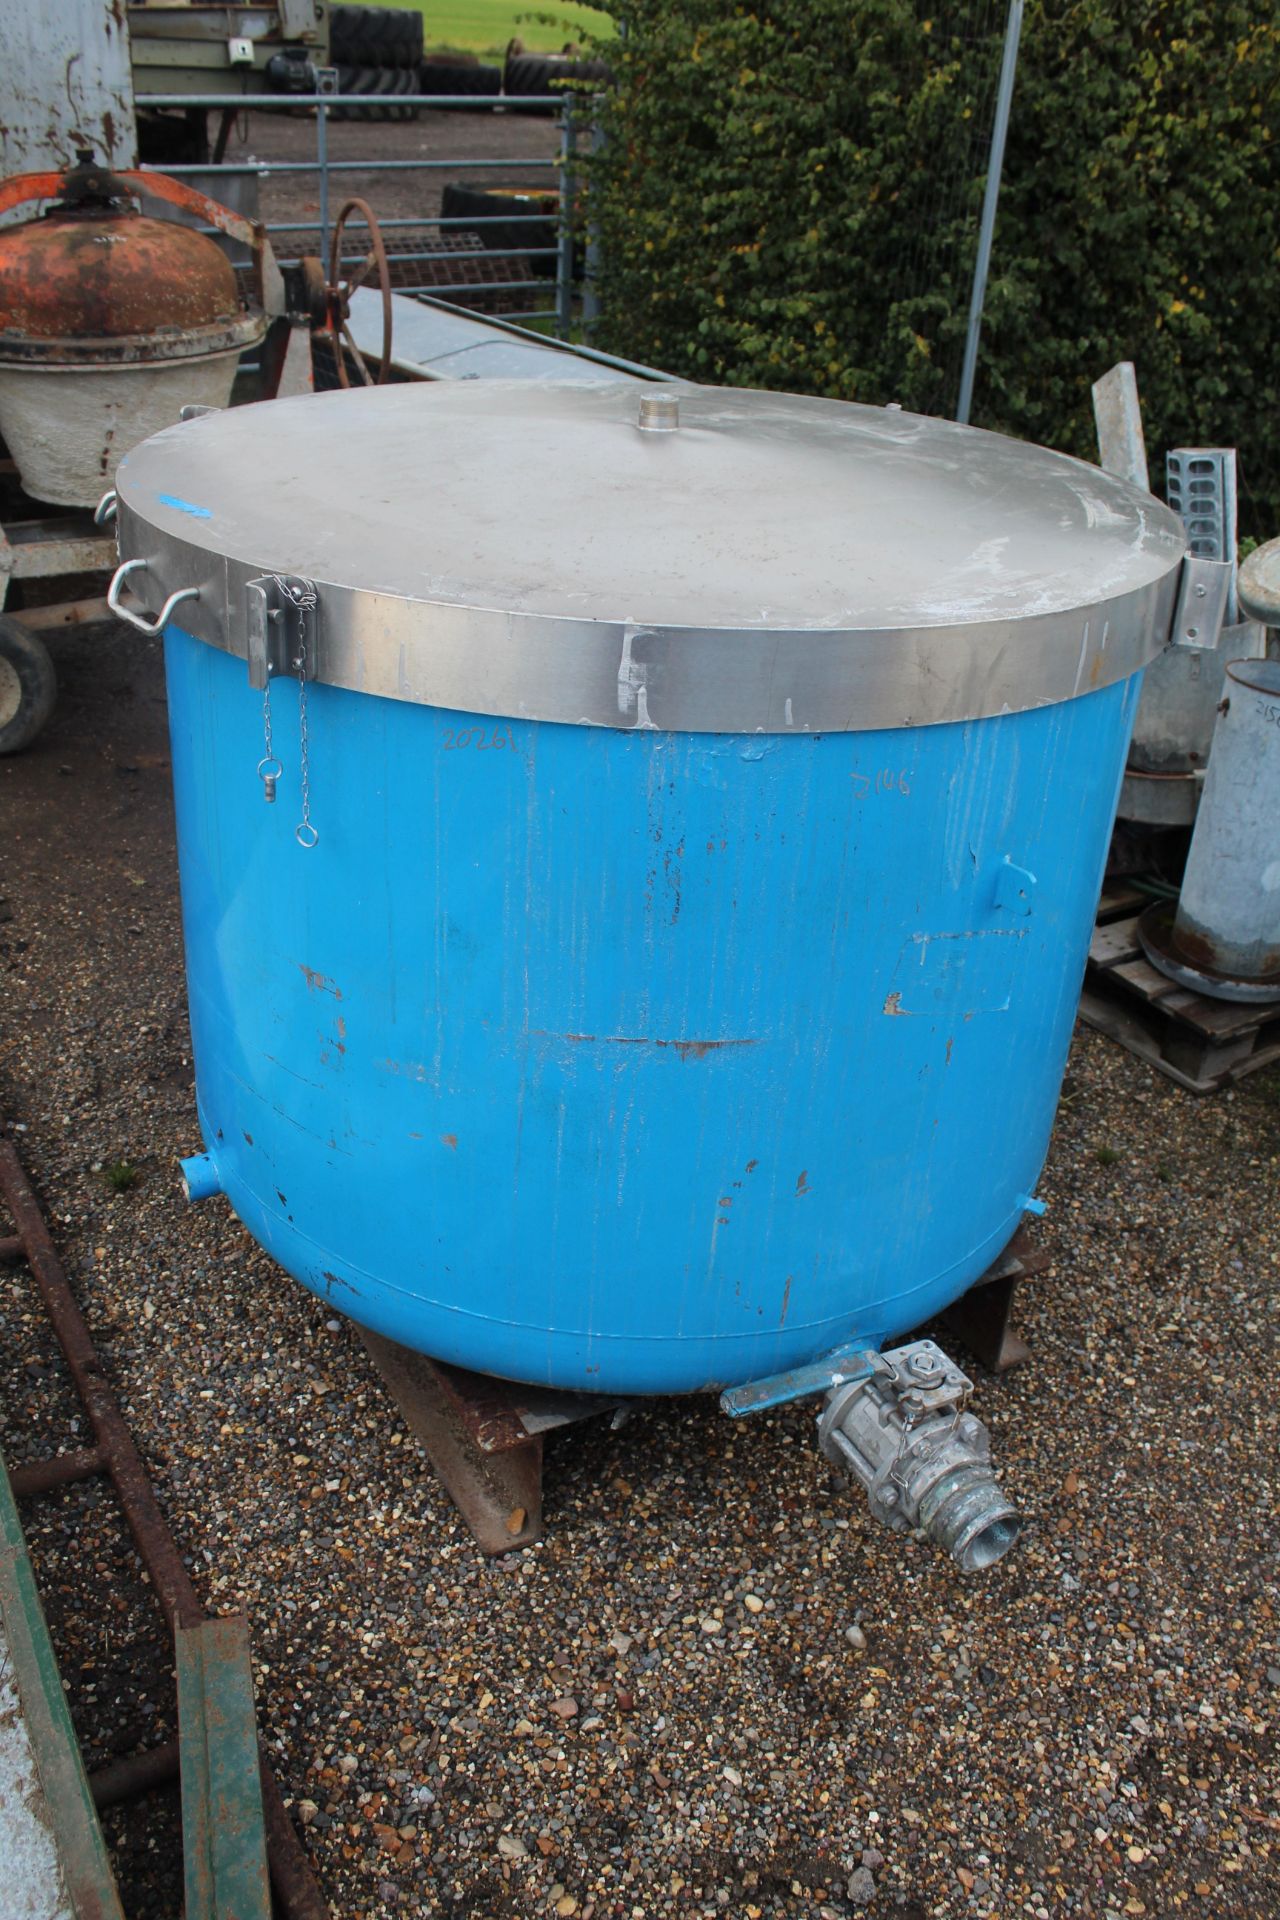 Stainless steel tank with lid.